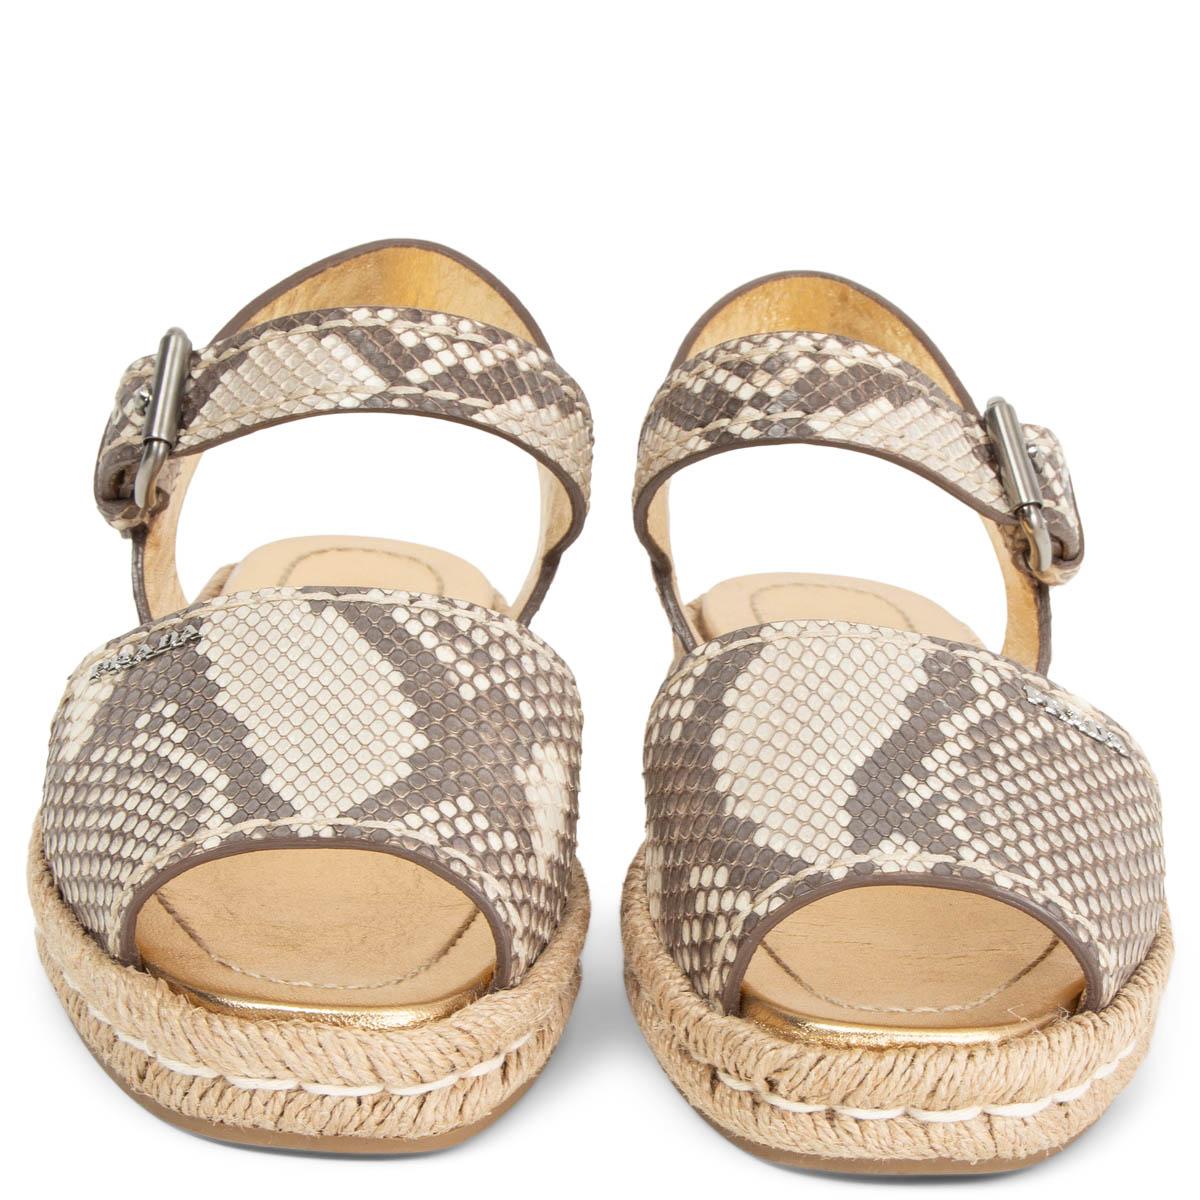 100% authentic Prada raffia flat sandals in sand and grey python with a beige sole. Have been worn once or twice and are in excellent condition.

Measurements
Imprinted Size	36.5
Shoe Size	36.5
Inside Sole	23cm (9in)
Width	7.5cm